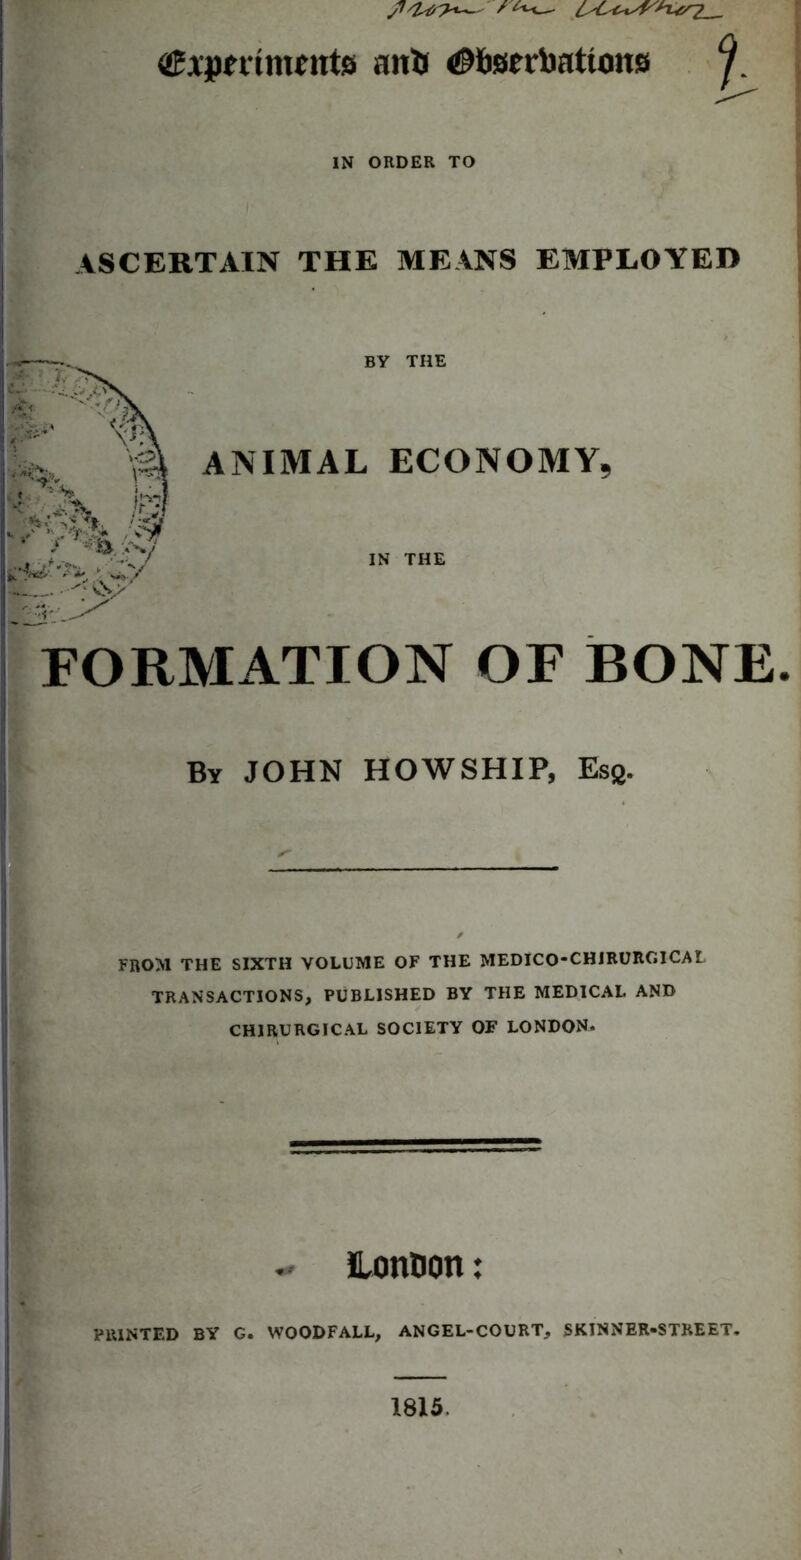 -Lcr? <®Apettmfnts anfc <0ftsrrl)attons IN ORDER TO ASCERTAIN THE MEANS EMPLOYED BY THE ANIMAL ECONOMY, IN THE FORMATION OF BONE. By JOHN HOWSHIP, Esg. FROM THE SIXTH VOLUME OF THE MEDICO-CHIRURGICAL TRANSACTIONS, PUBLISHED BY THE MEDICAL AND CHIRURGICAL SOCIETY OF LONDON. - Lontion: PRINTED BY G. WOODFALL, AN GEL-COURT, SKINNER-STREET. 1815